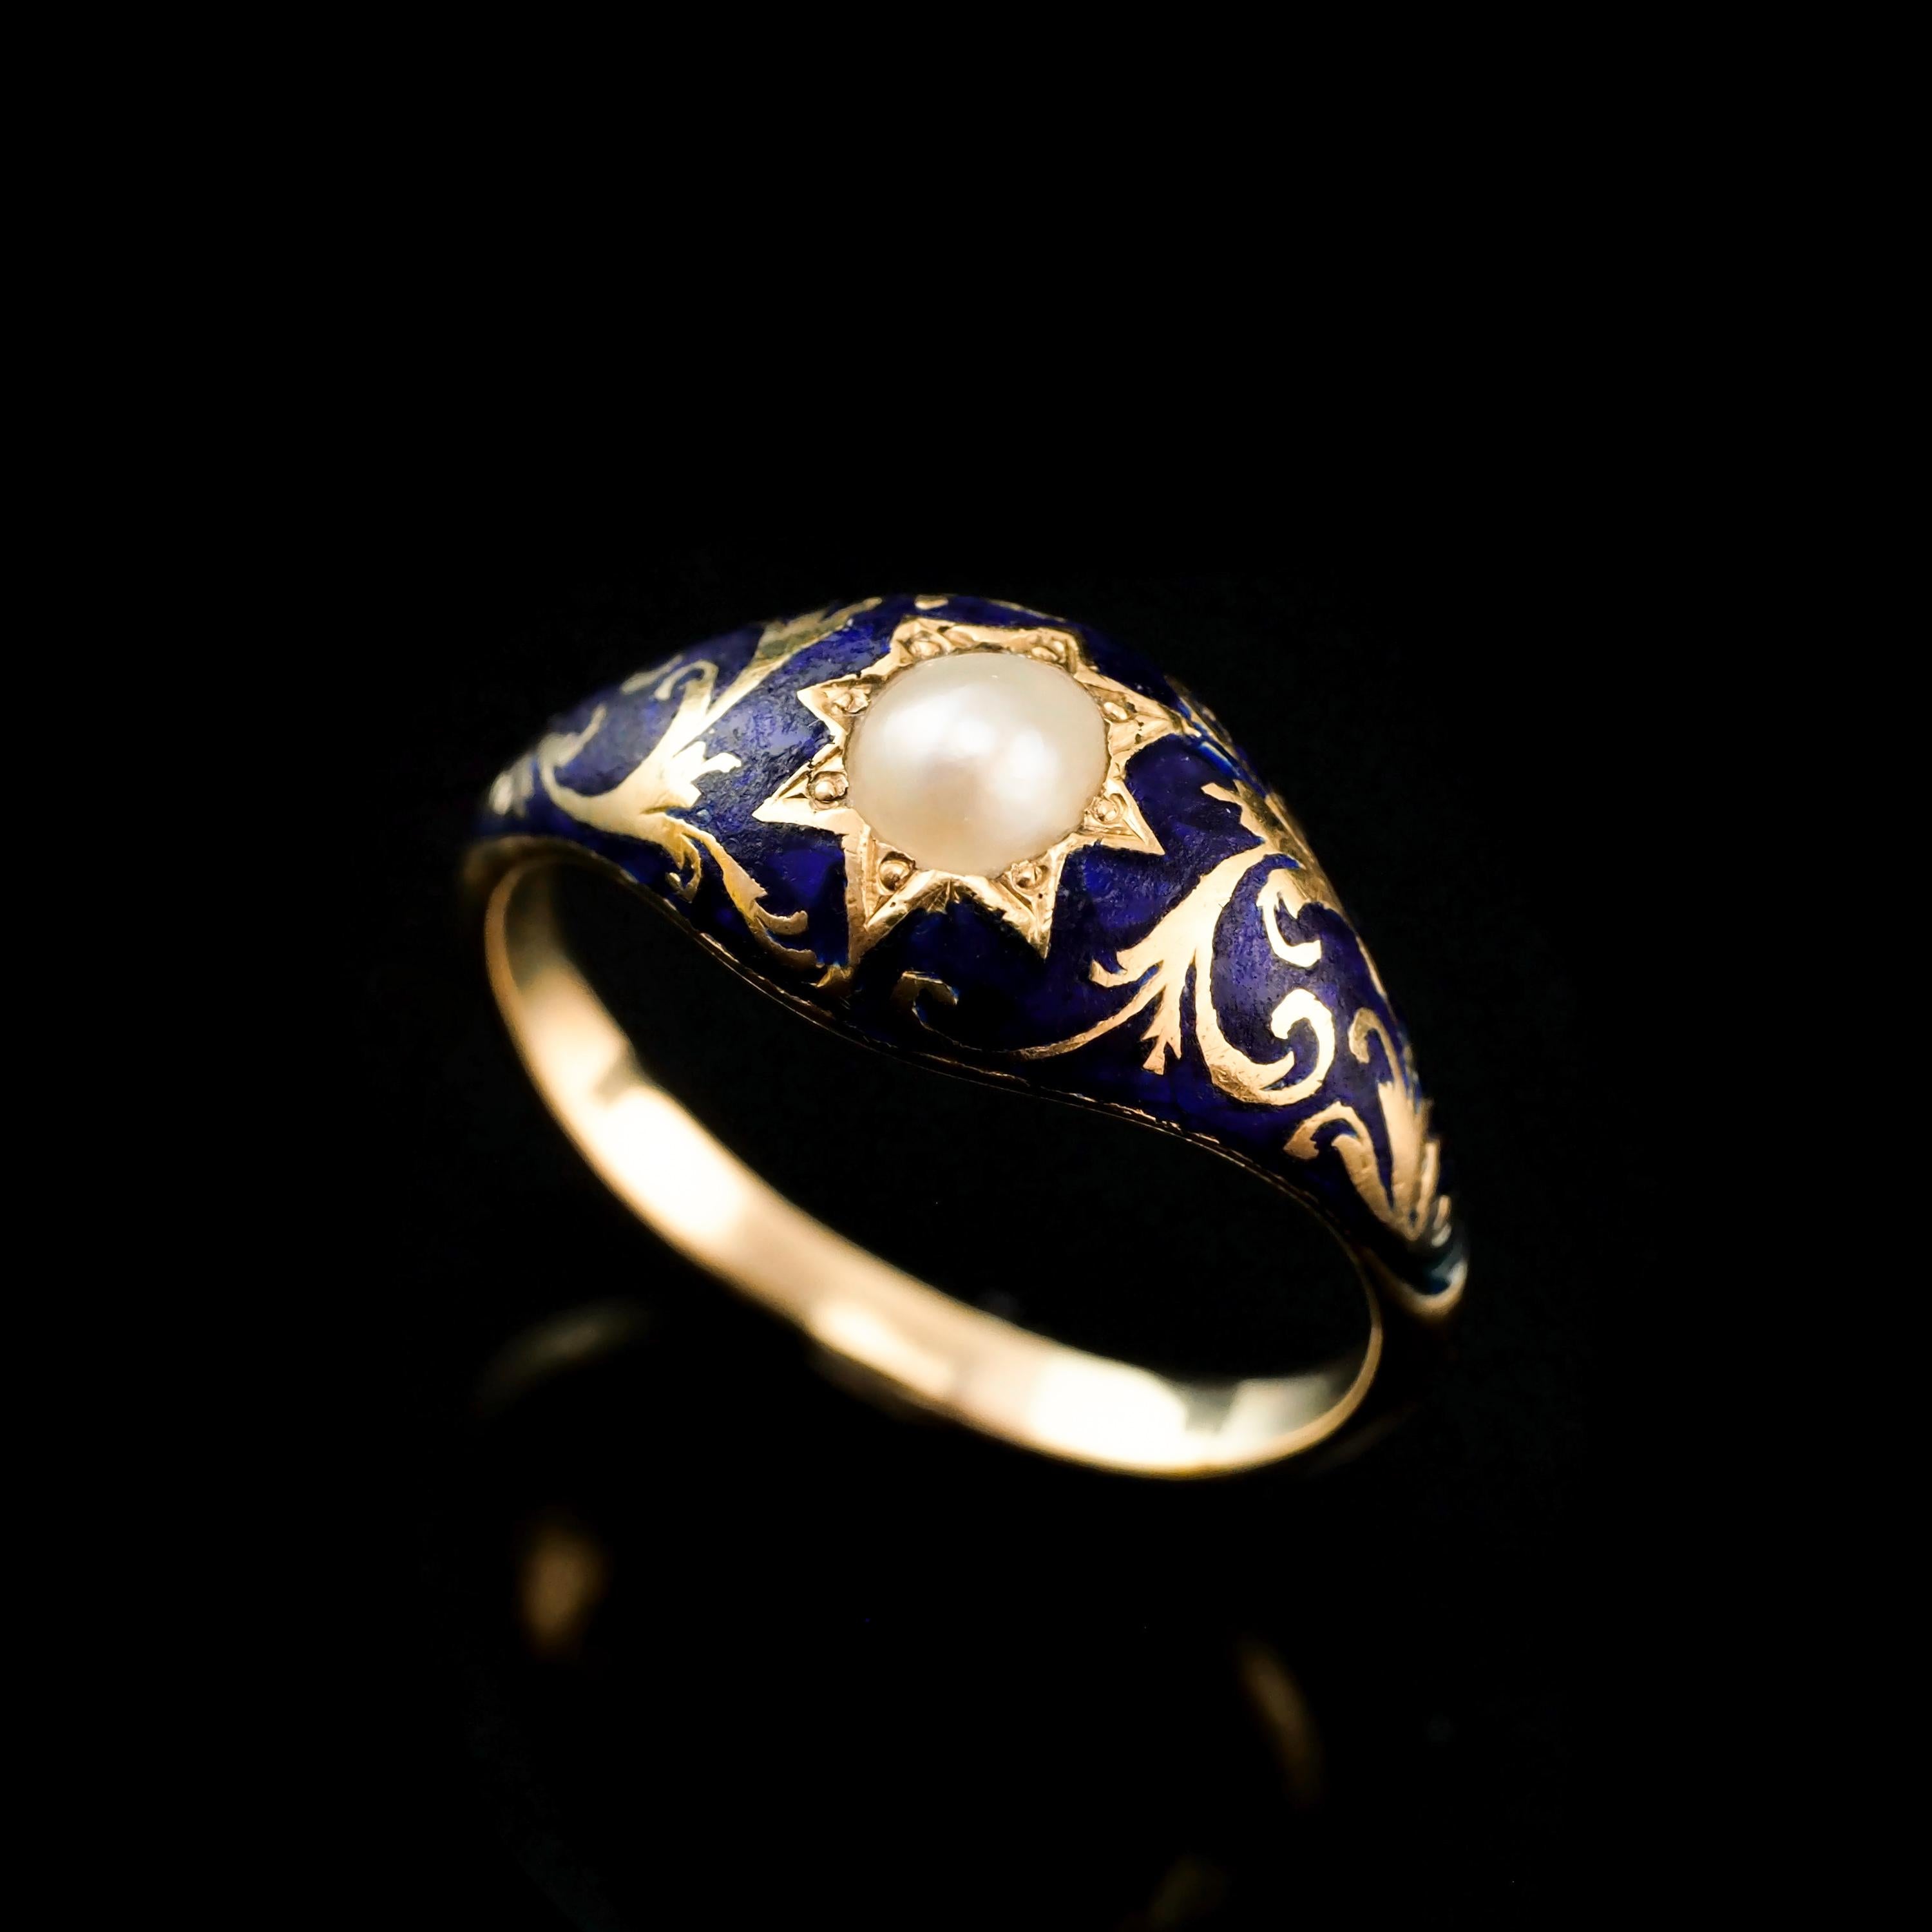 Antique Victorian 18K Gold Enamel & Pearl Ring with Scrolled Decorations c.1880 In Good Condition In London, GB